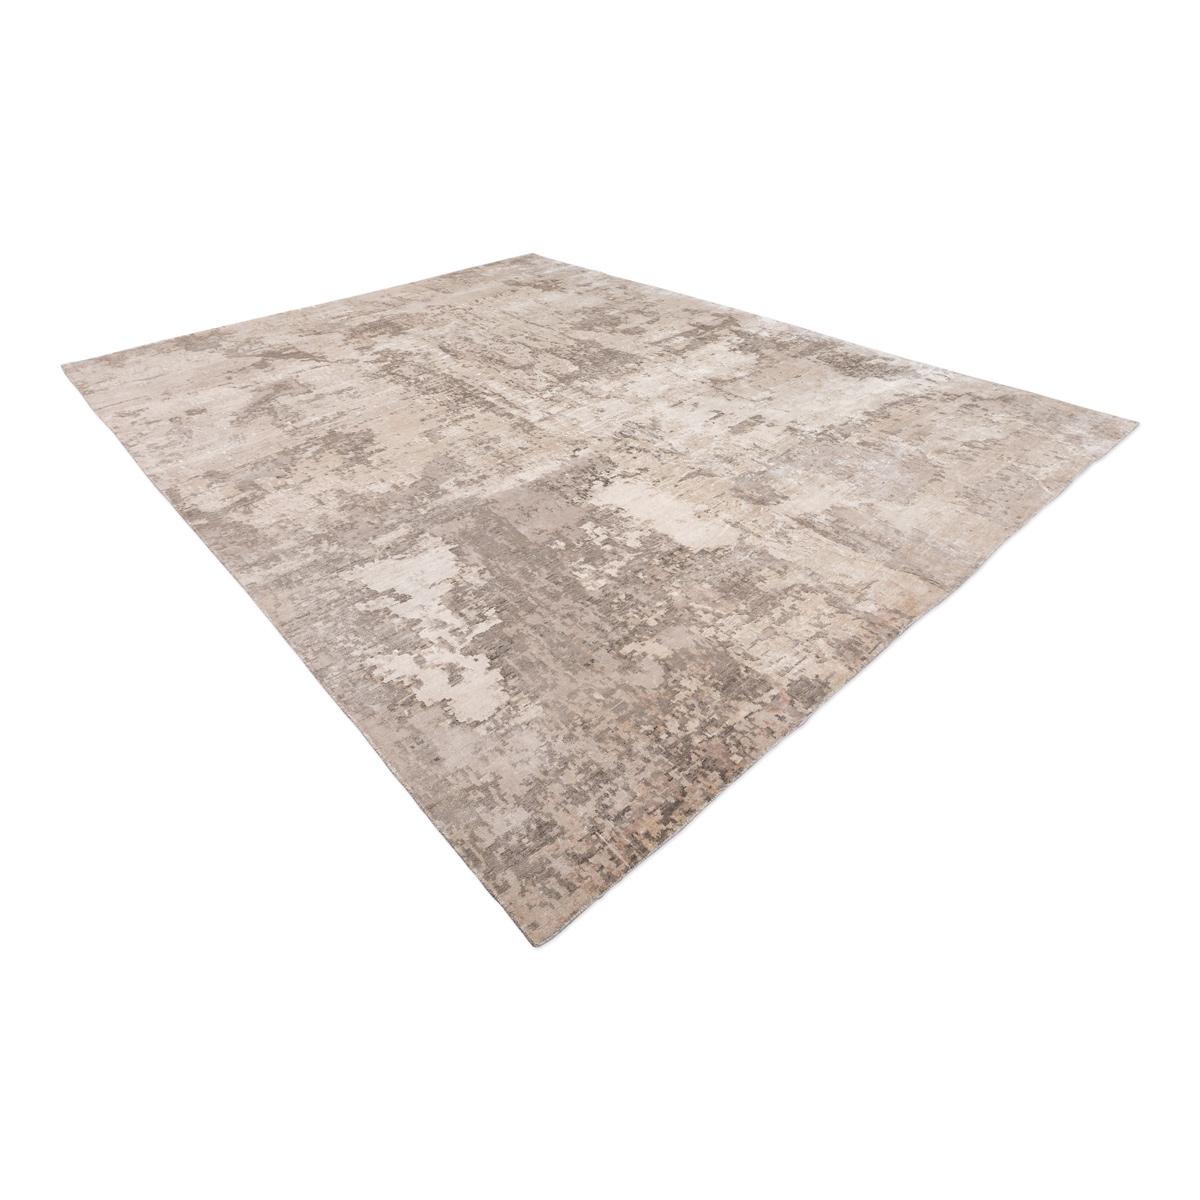 Contemporary rug belonging to the abstract collection
- Elaborated by hand in 100% silk and wool over Land colors.
- Its tonalities are not uniform with what this type of rugs are very functional when it comes to decorating with other fabrics
- Its